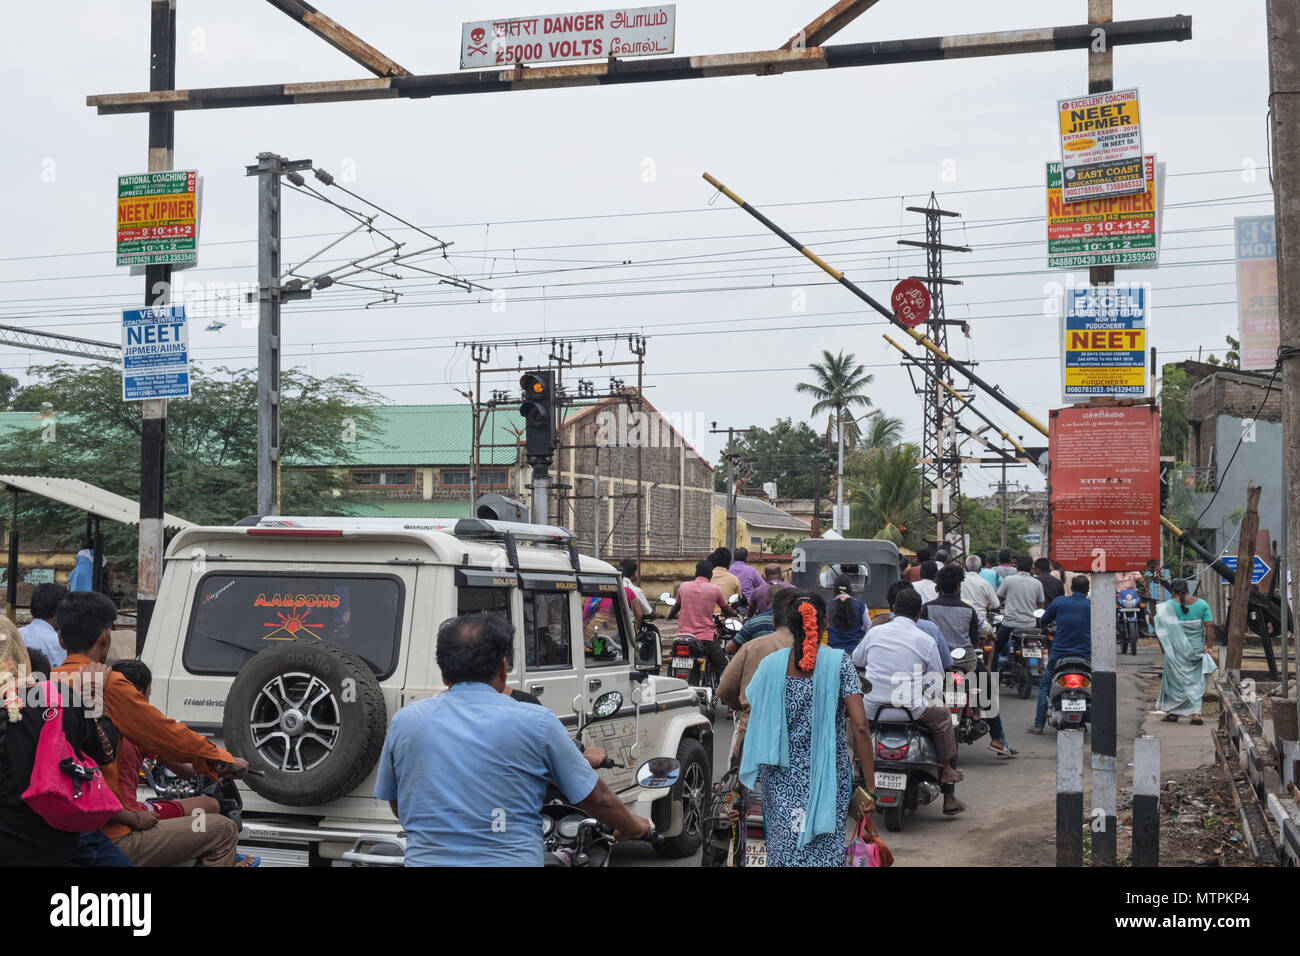 Pondicherry, India - March 17, 2018: Traffic and pedestrians streaming over a level crossing near the station after a passenger train has just passed Stock Photo